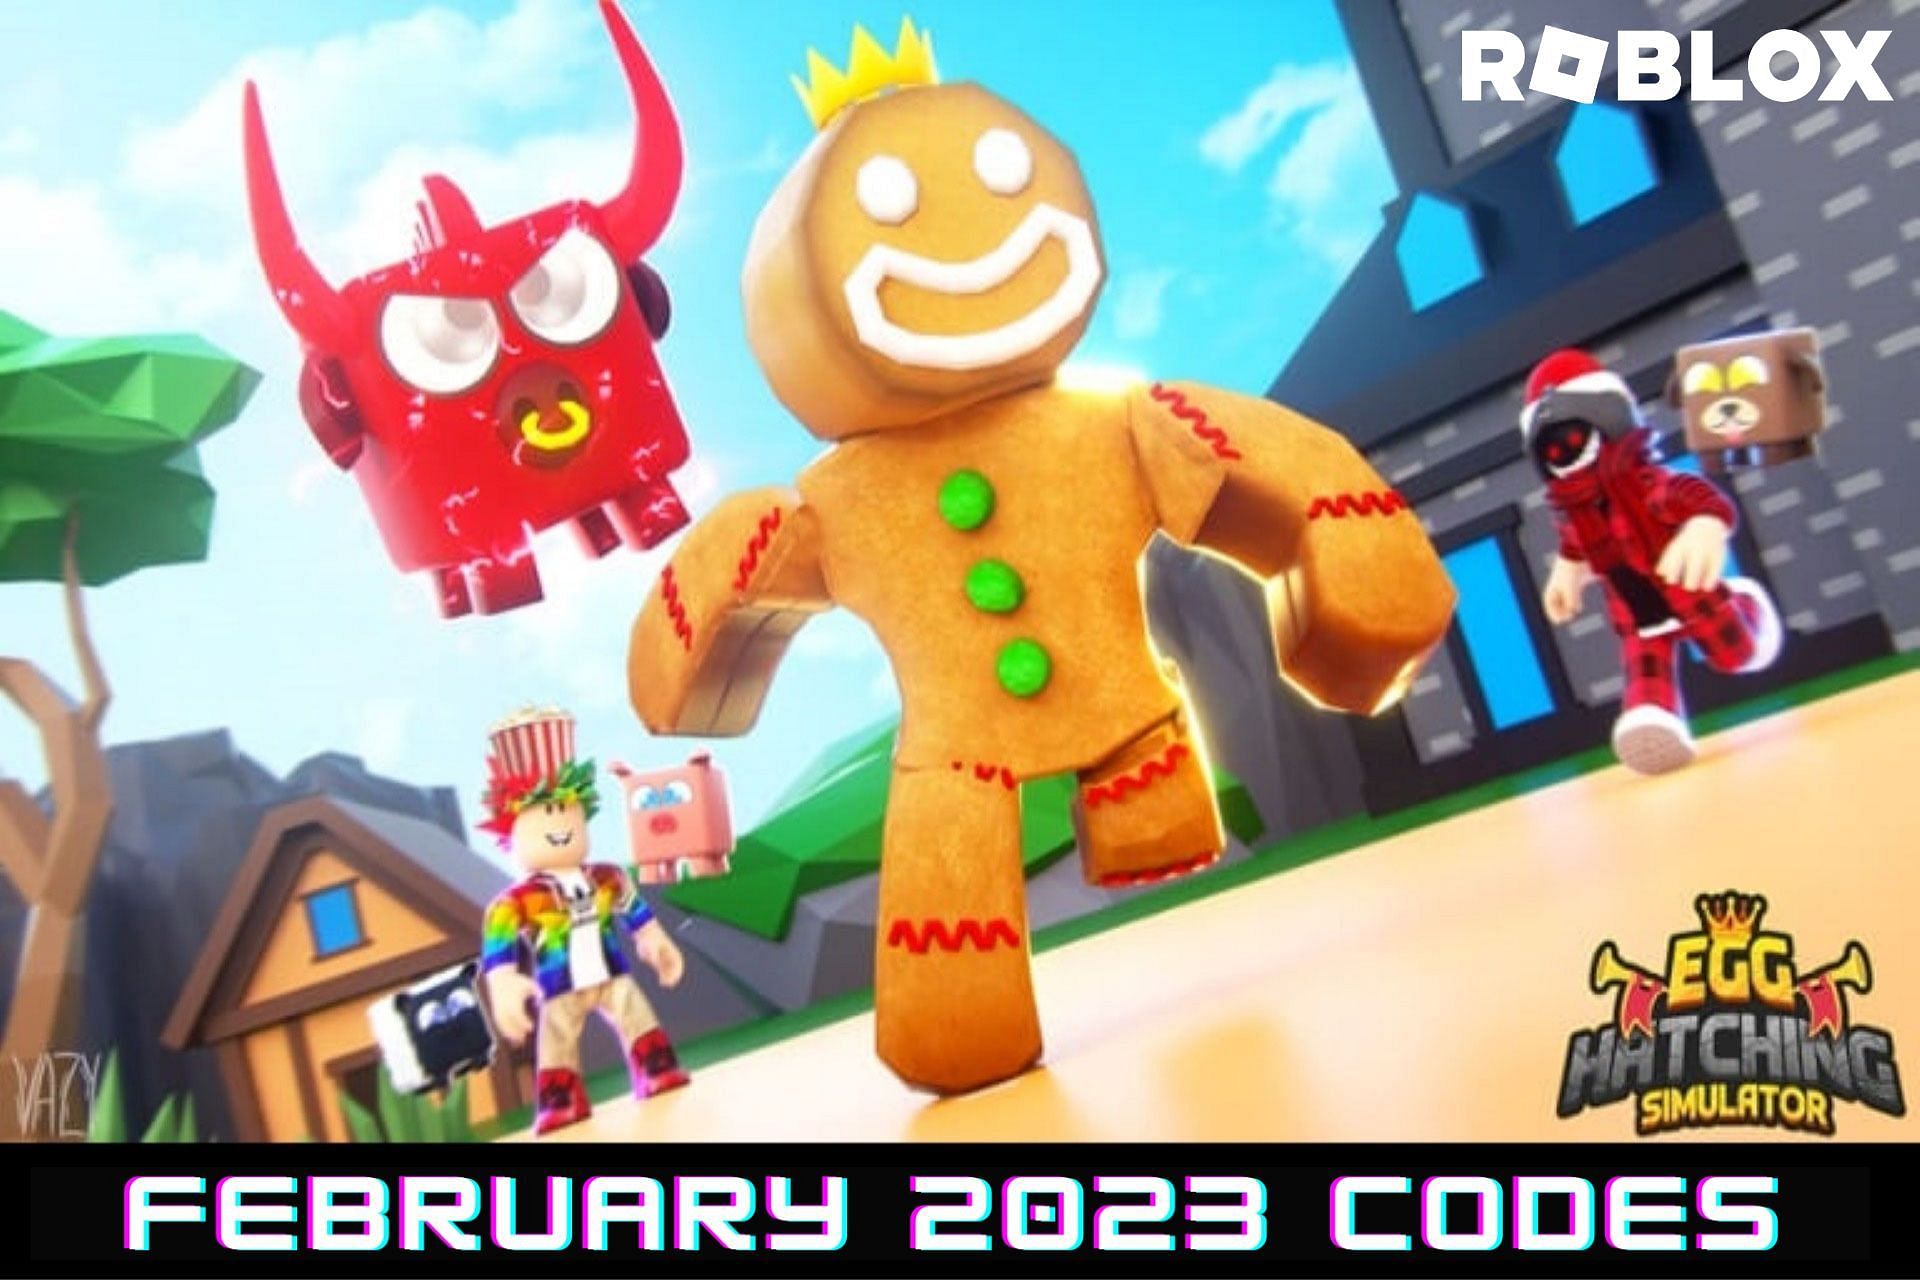 Roblox Egg Hatching Simulator Codes For February 2023 Free Coins Boosts And More